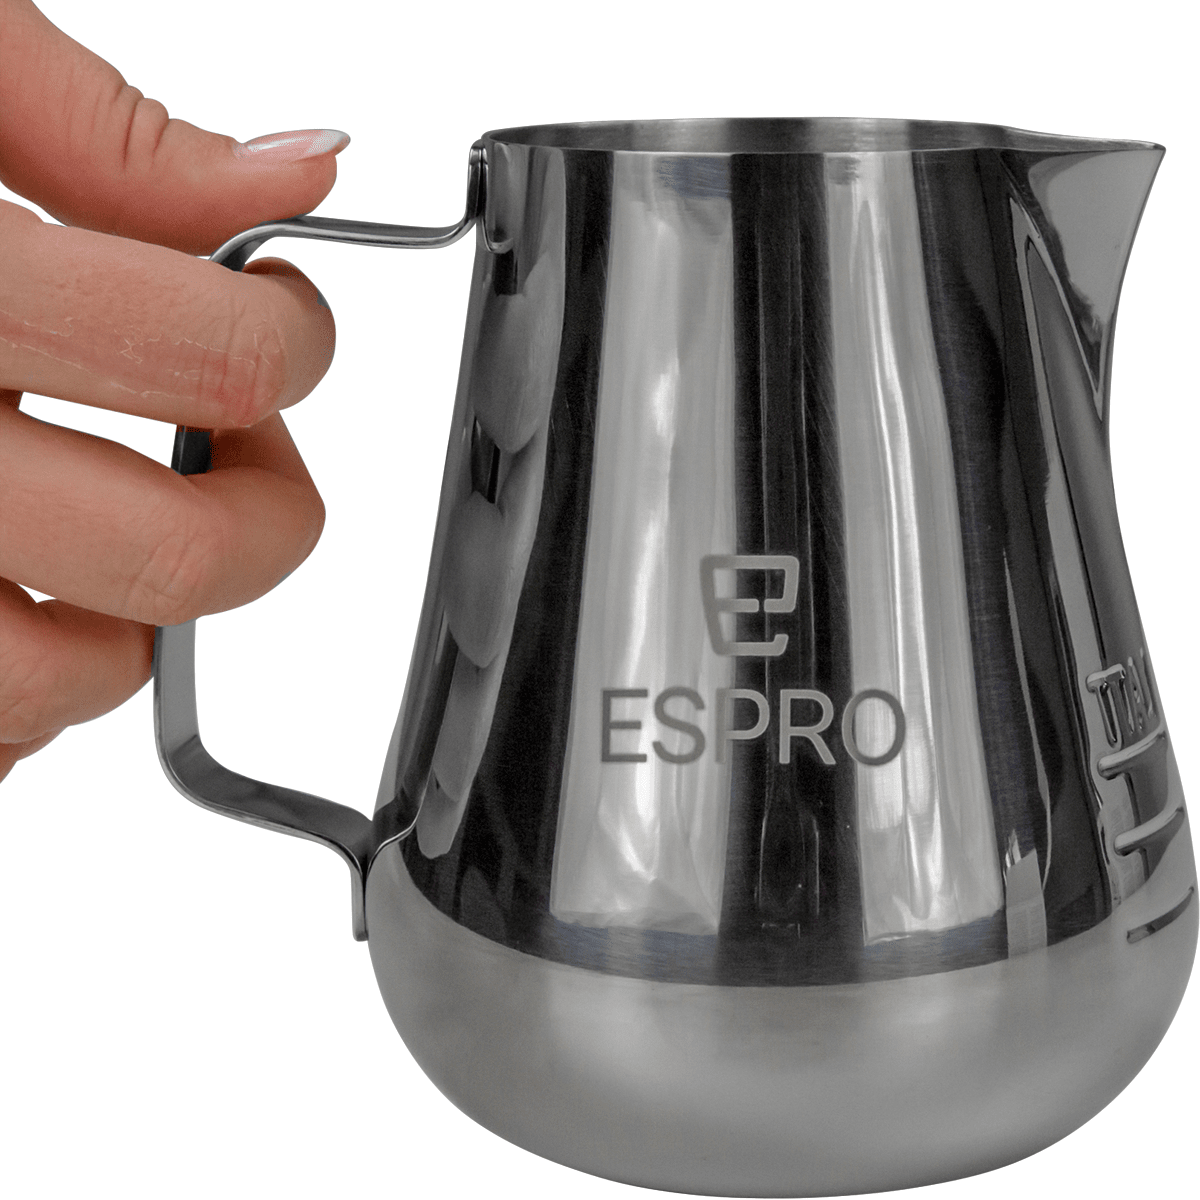 Espro Toroid 2 Steaming Pitcher - 25 oz with recipe lines